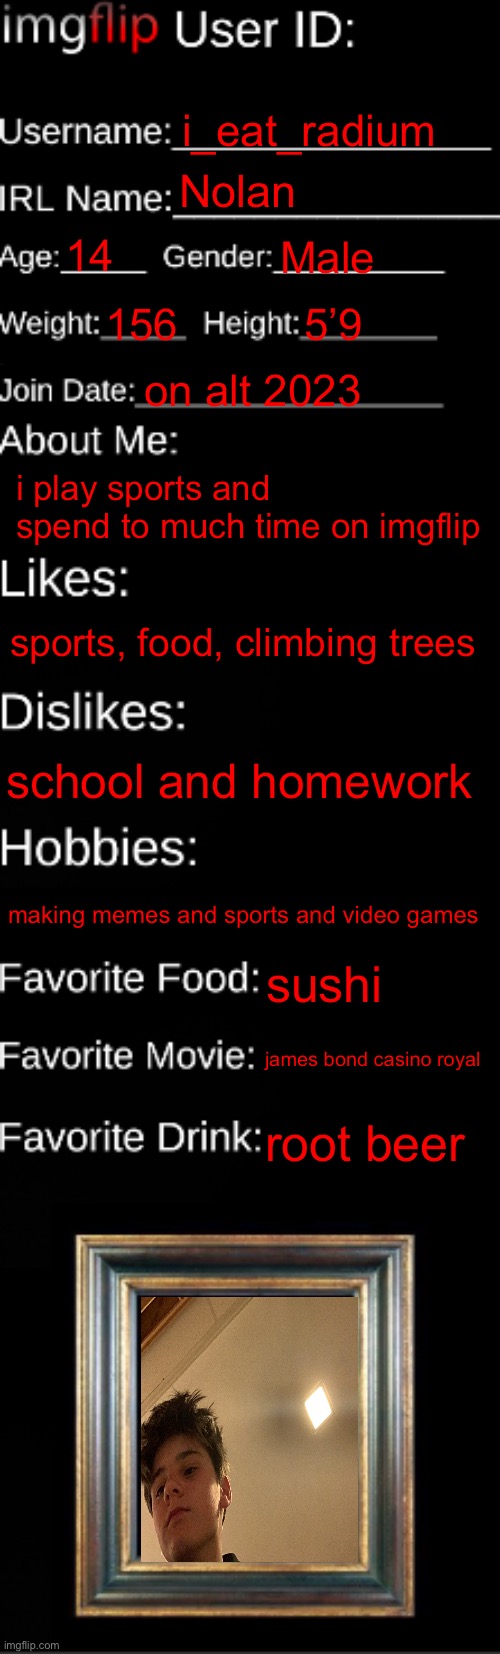 imgflip ID Card | i_eat_radium; Nolan; 14; Male; 156; 5’9; on alt 2023; i play sports and spend to much time on imgflip; sports, food, climbing trees; school and homework; making memes and sports and video games; sushi; james bond casino royal; root beer | image tagged in imgflip id card | made w/ Imgflip meme maker